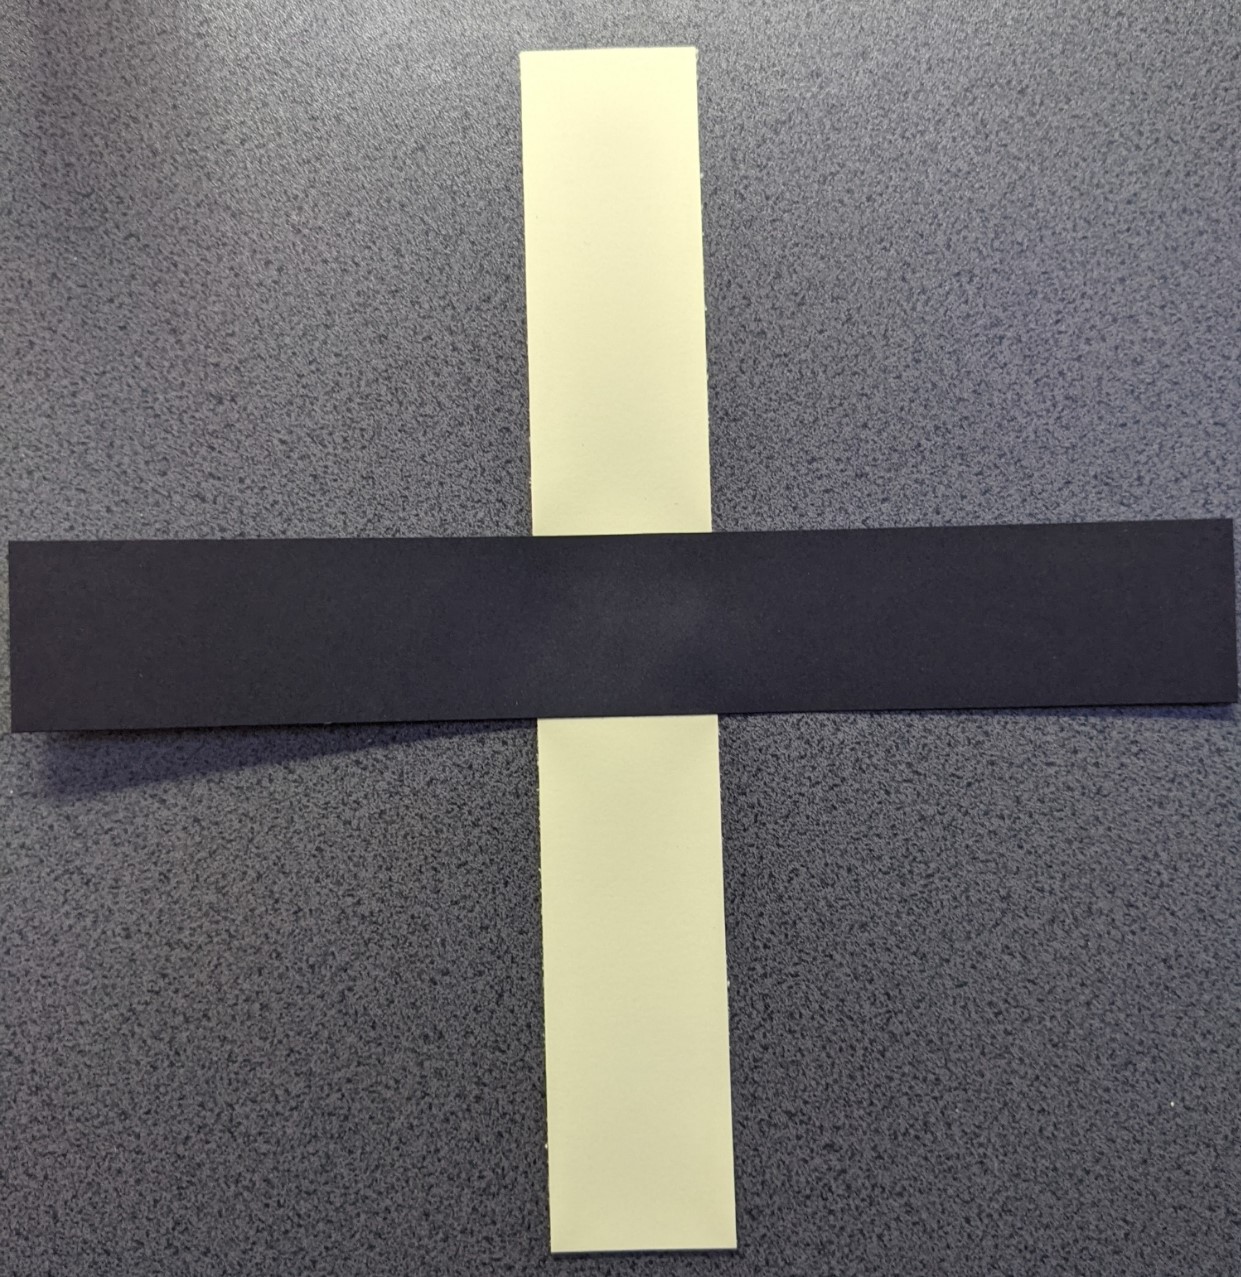 Two strips of card glued in their centres to form a cross